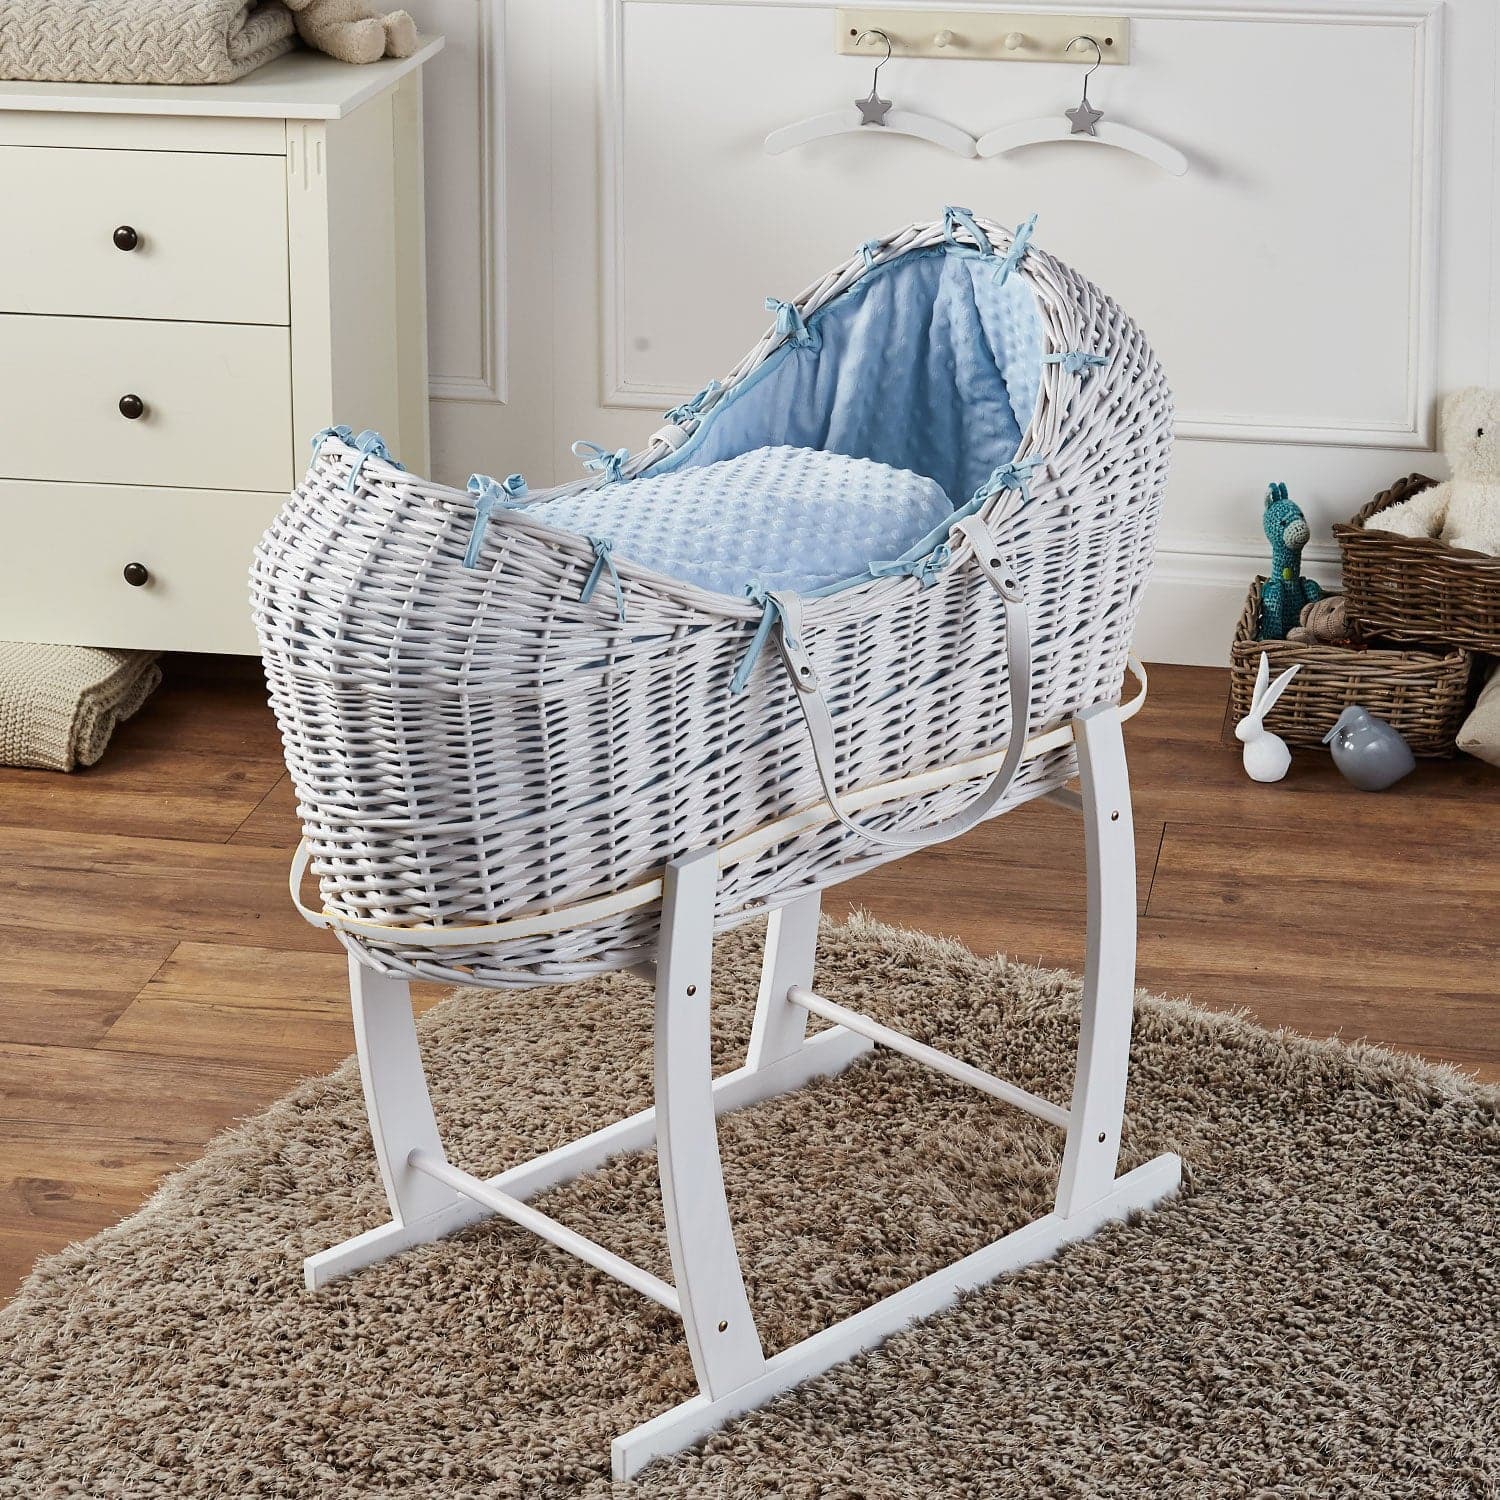 Wicker Deluxe Pod Baby Moses Basket With Stand - For Your Little One